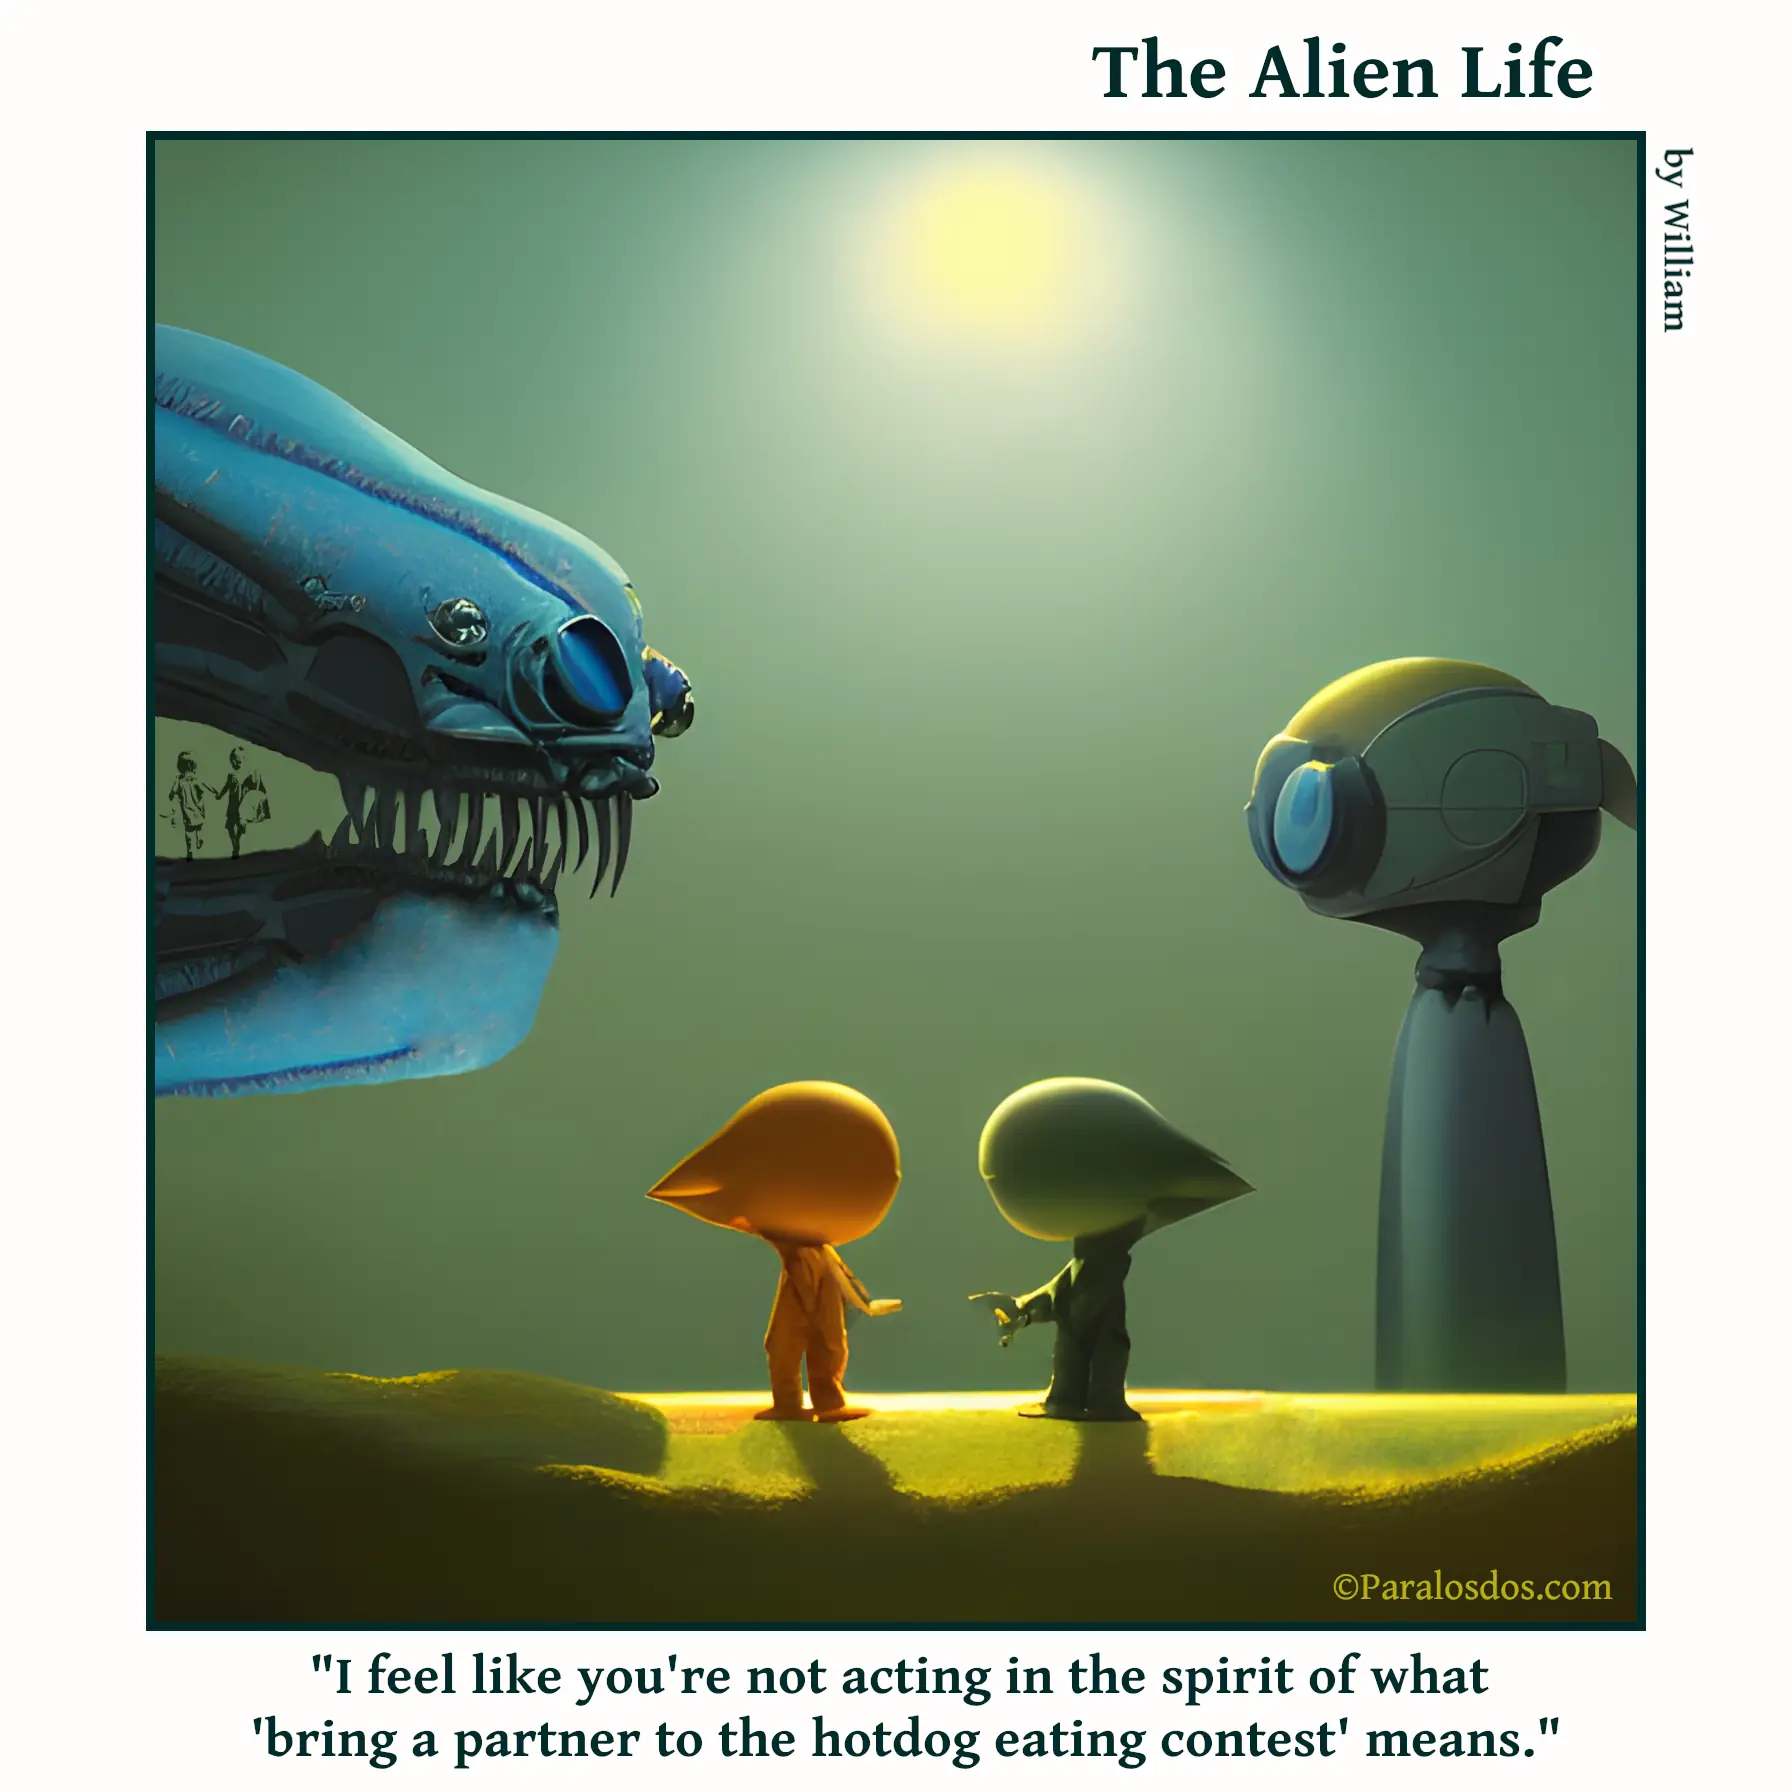 The Alien Life, one panel Comic. Two aliens are facing each other. The one on the right has a friend standing behind him and to the right. The one on the left has a huge t-rex looking creature with him. The caption reads: "I feel like you're not acting in the spirit of what 'bring a partner to the hotdog eating contest' means."